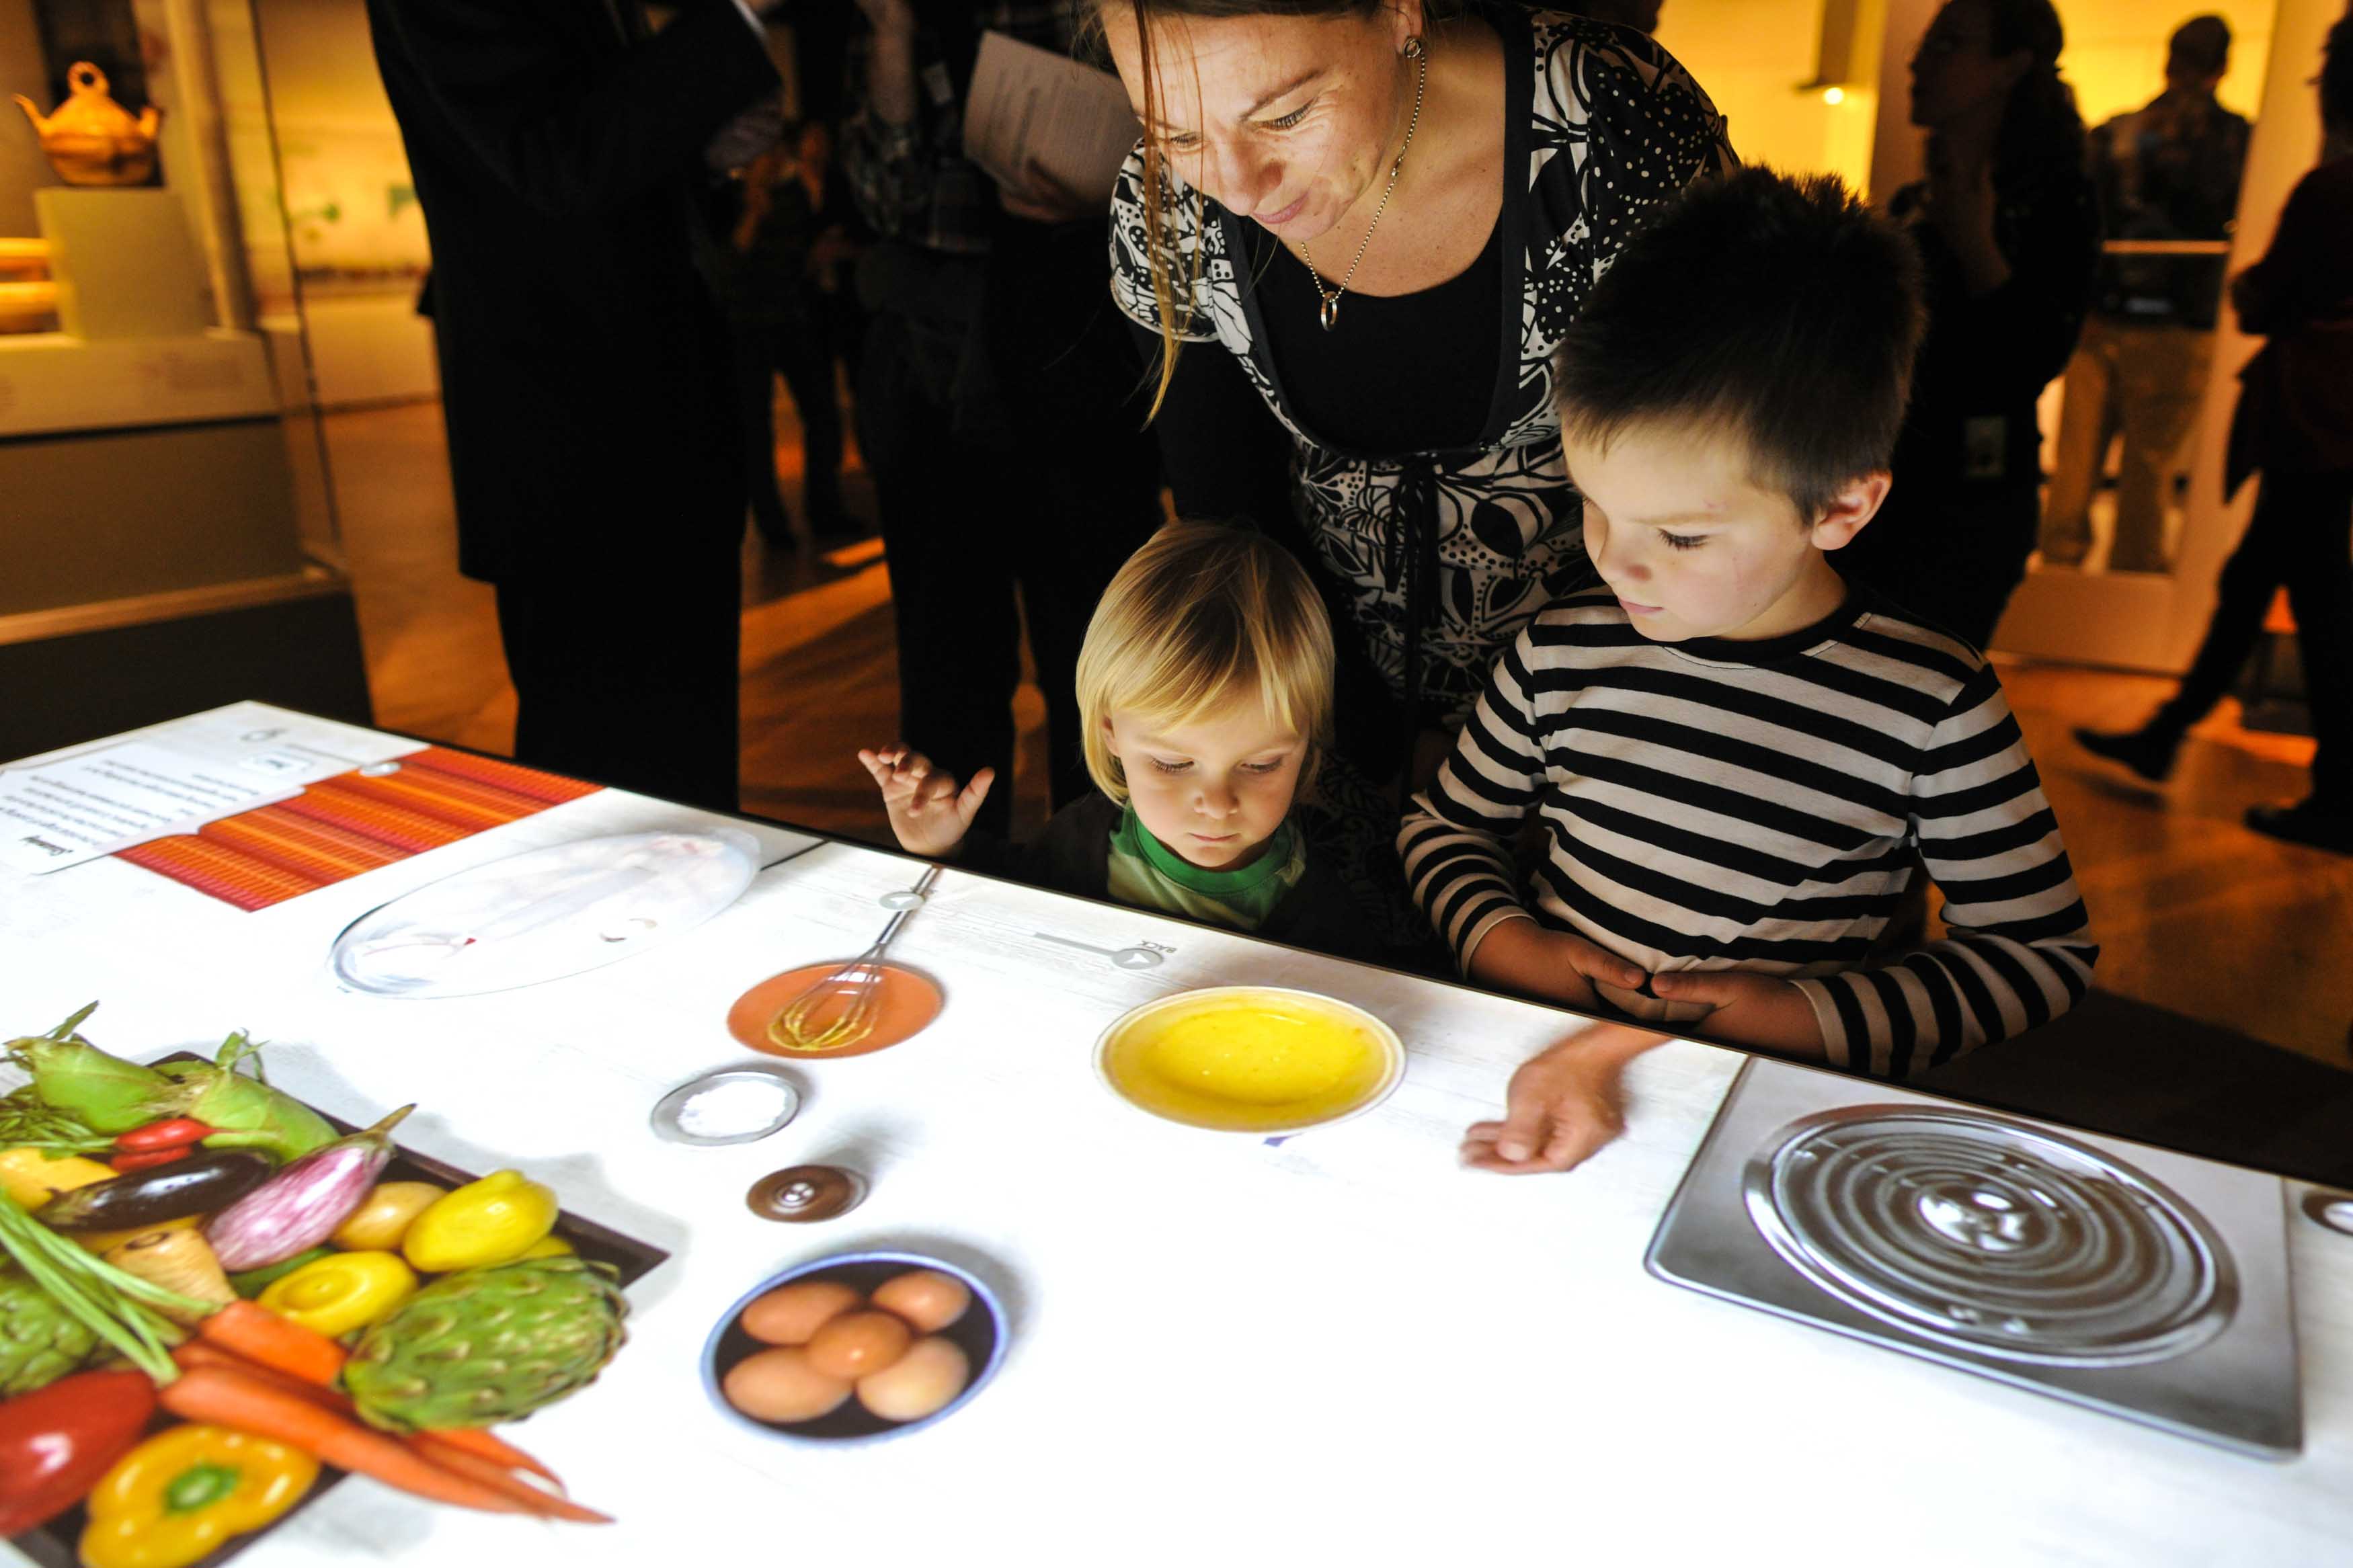 Visitors may take a turn at an interactive cooking table to 'make' virtual dishes eaten around the world. The exhibition open will be in Austin from March 12 to July 24, 2016.